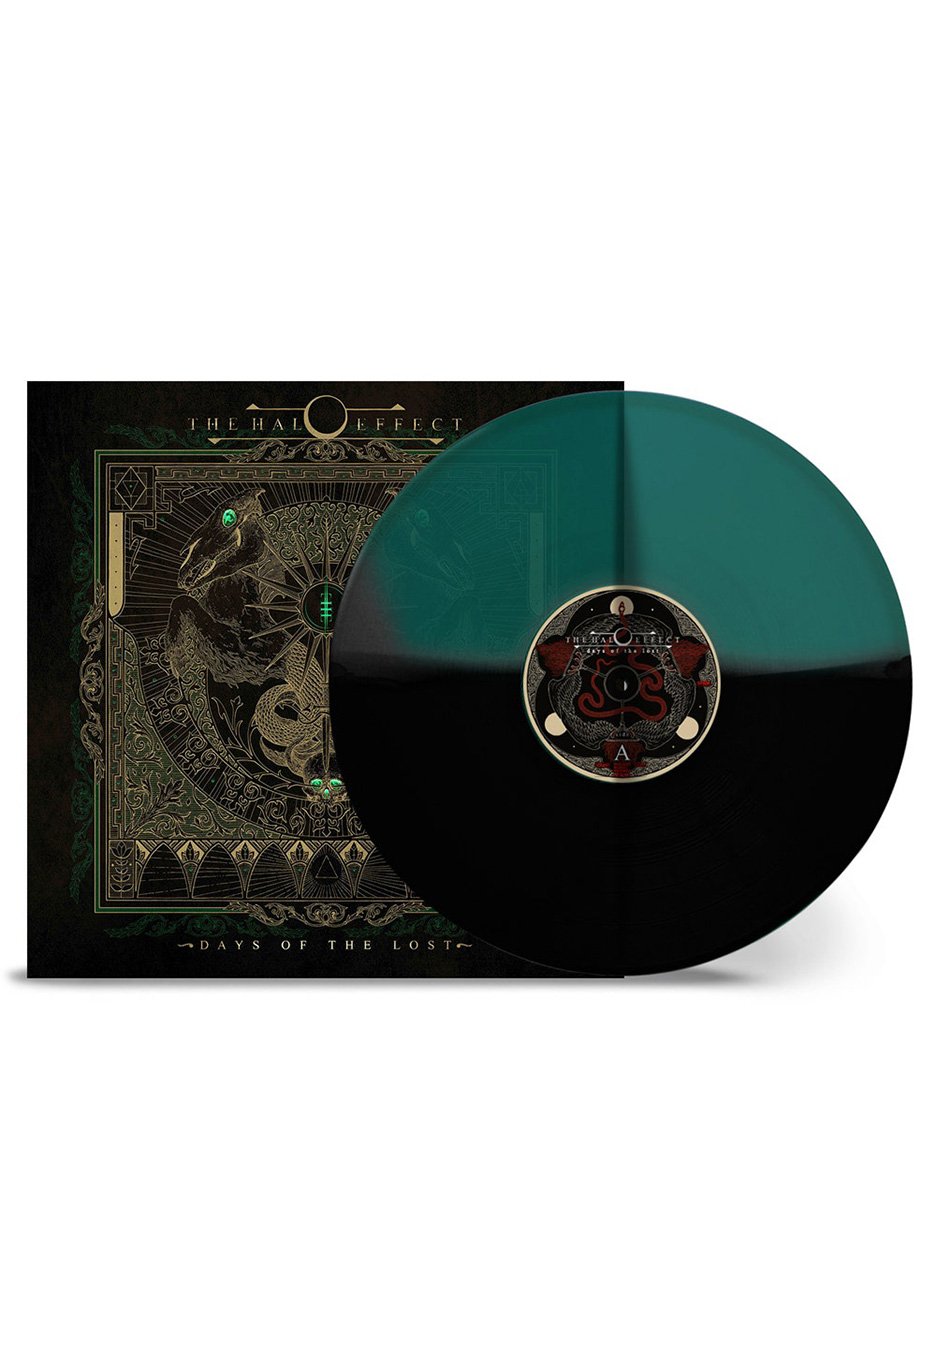 The Halo Effect - Days Of The Lost  Black/Green Transparent - Colored Vinyl